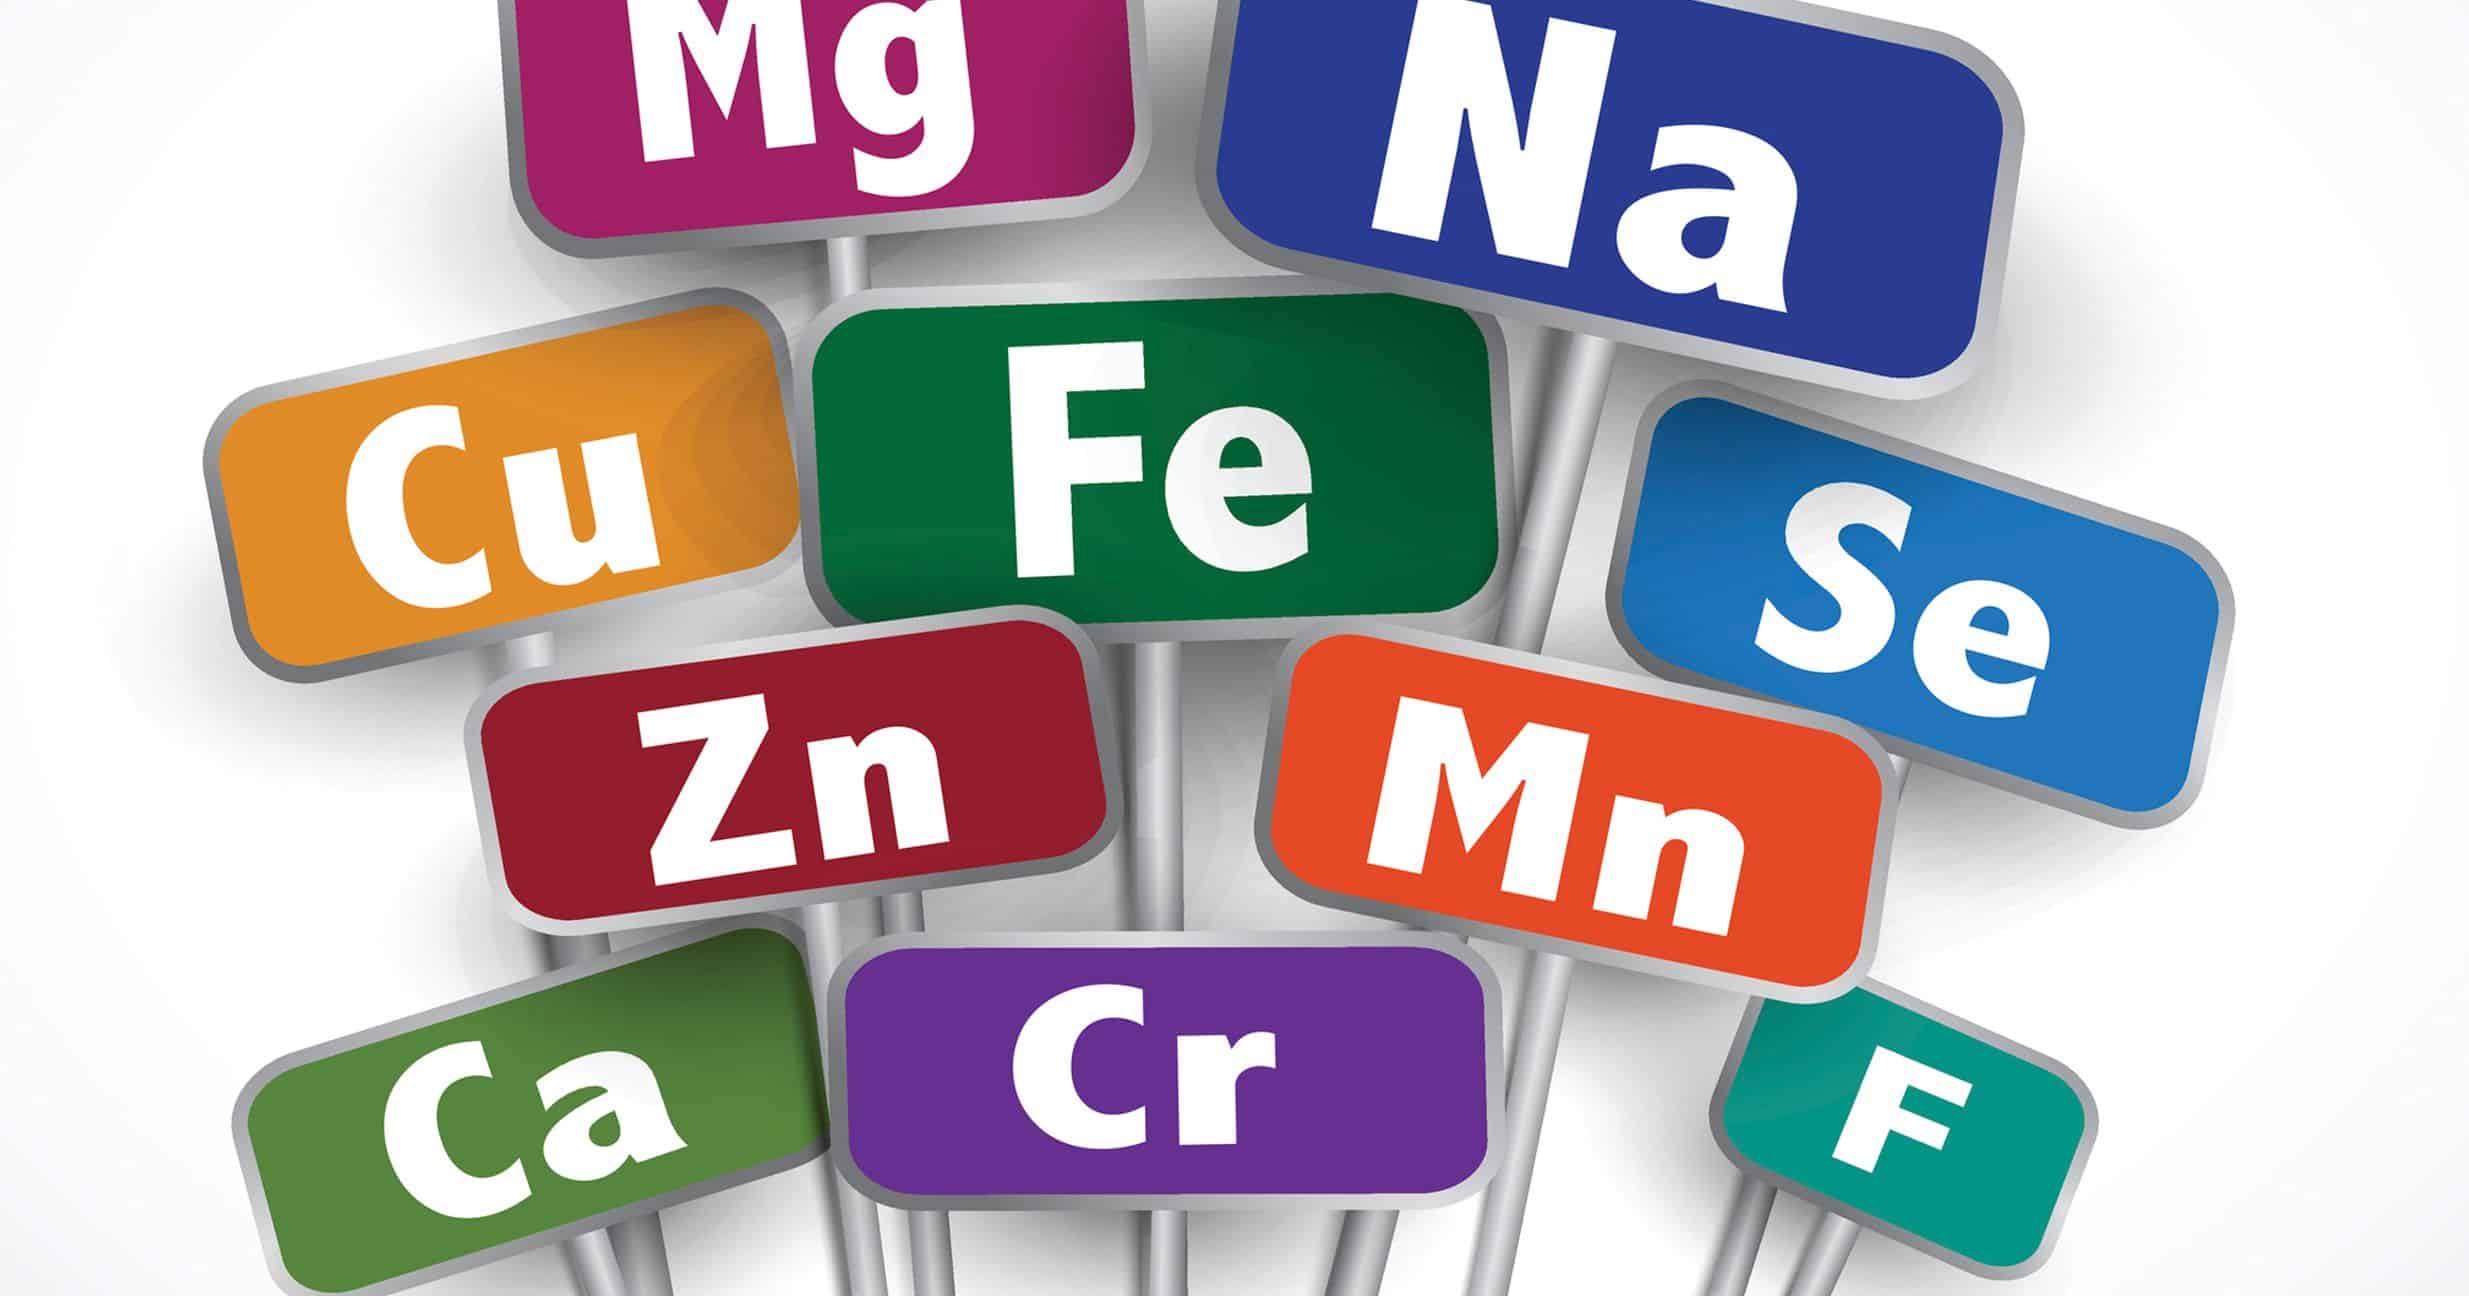 Mineral Health Benefits in Supplements graphic signs of mineral abbreviations like Mg for Magnesium